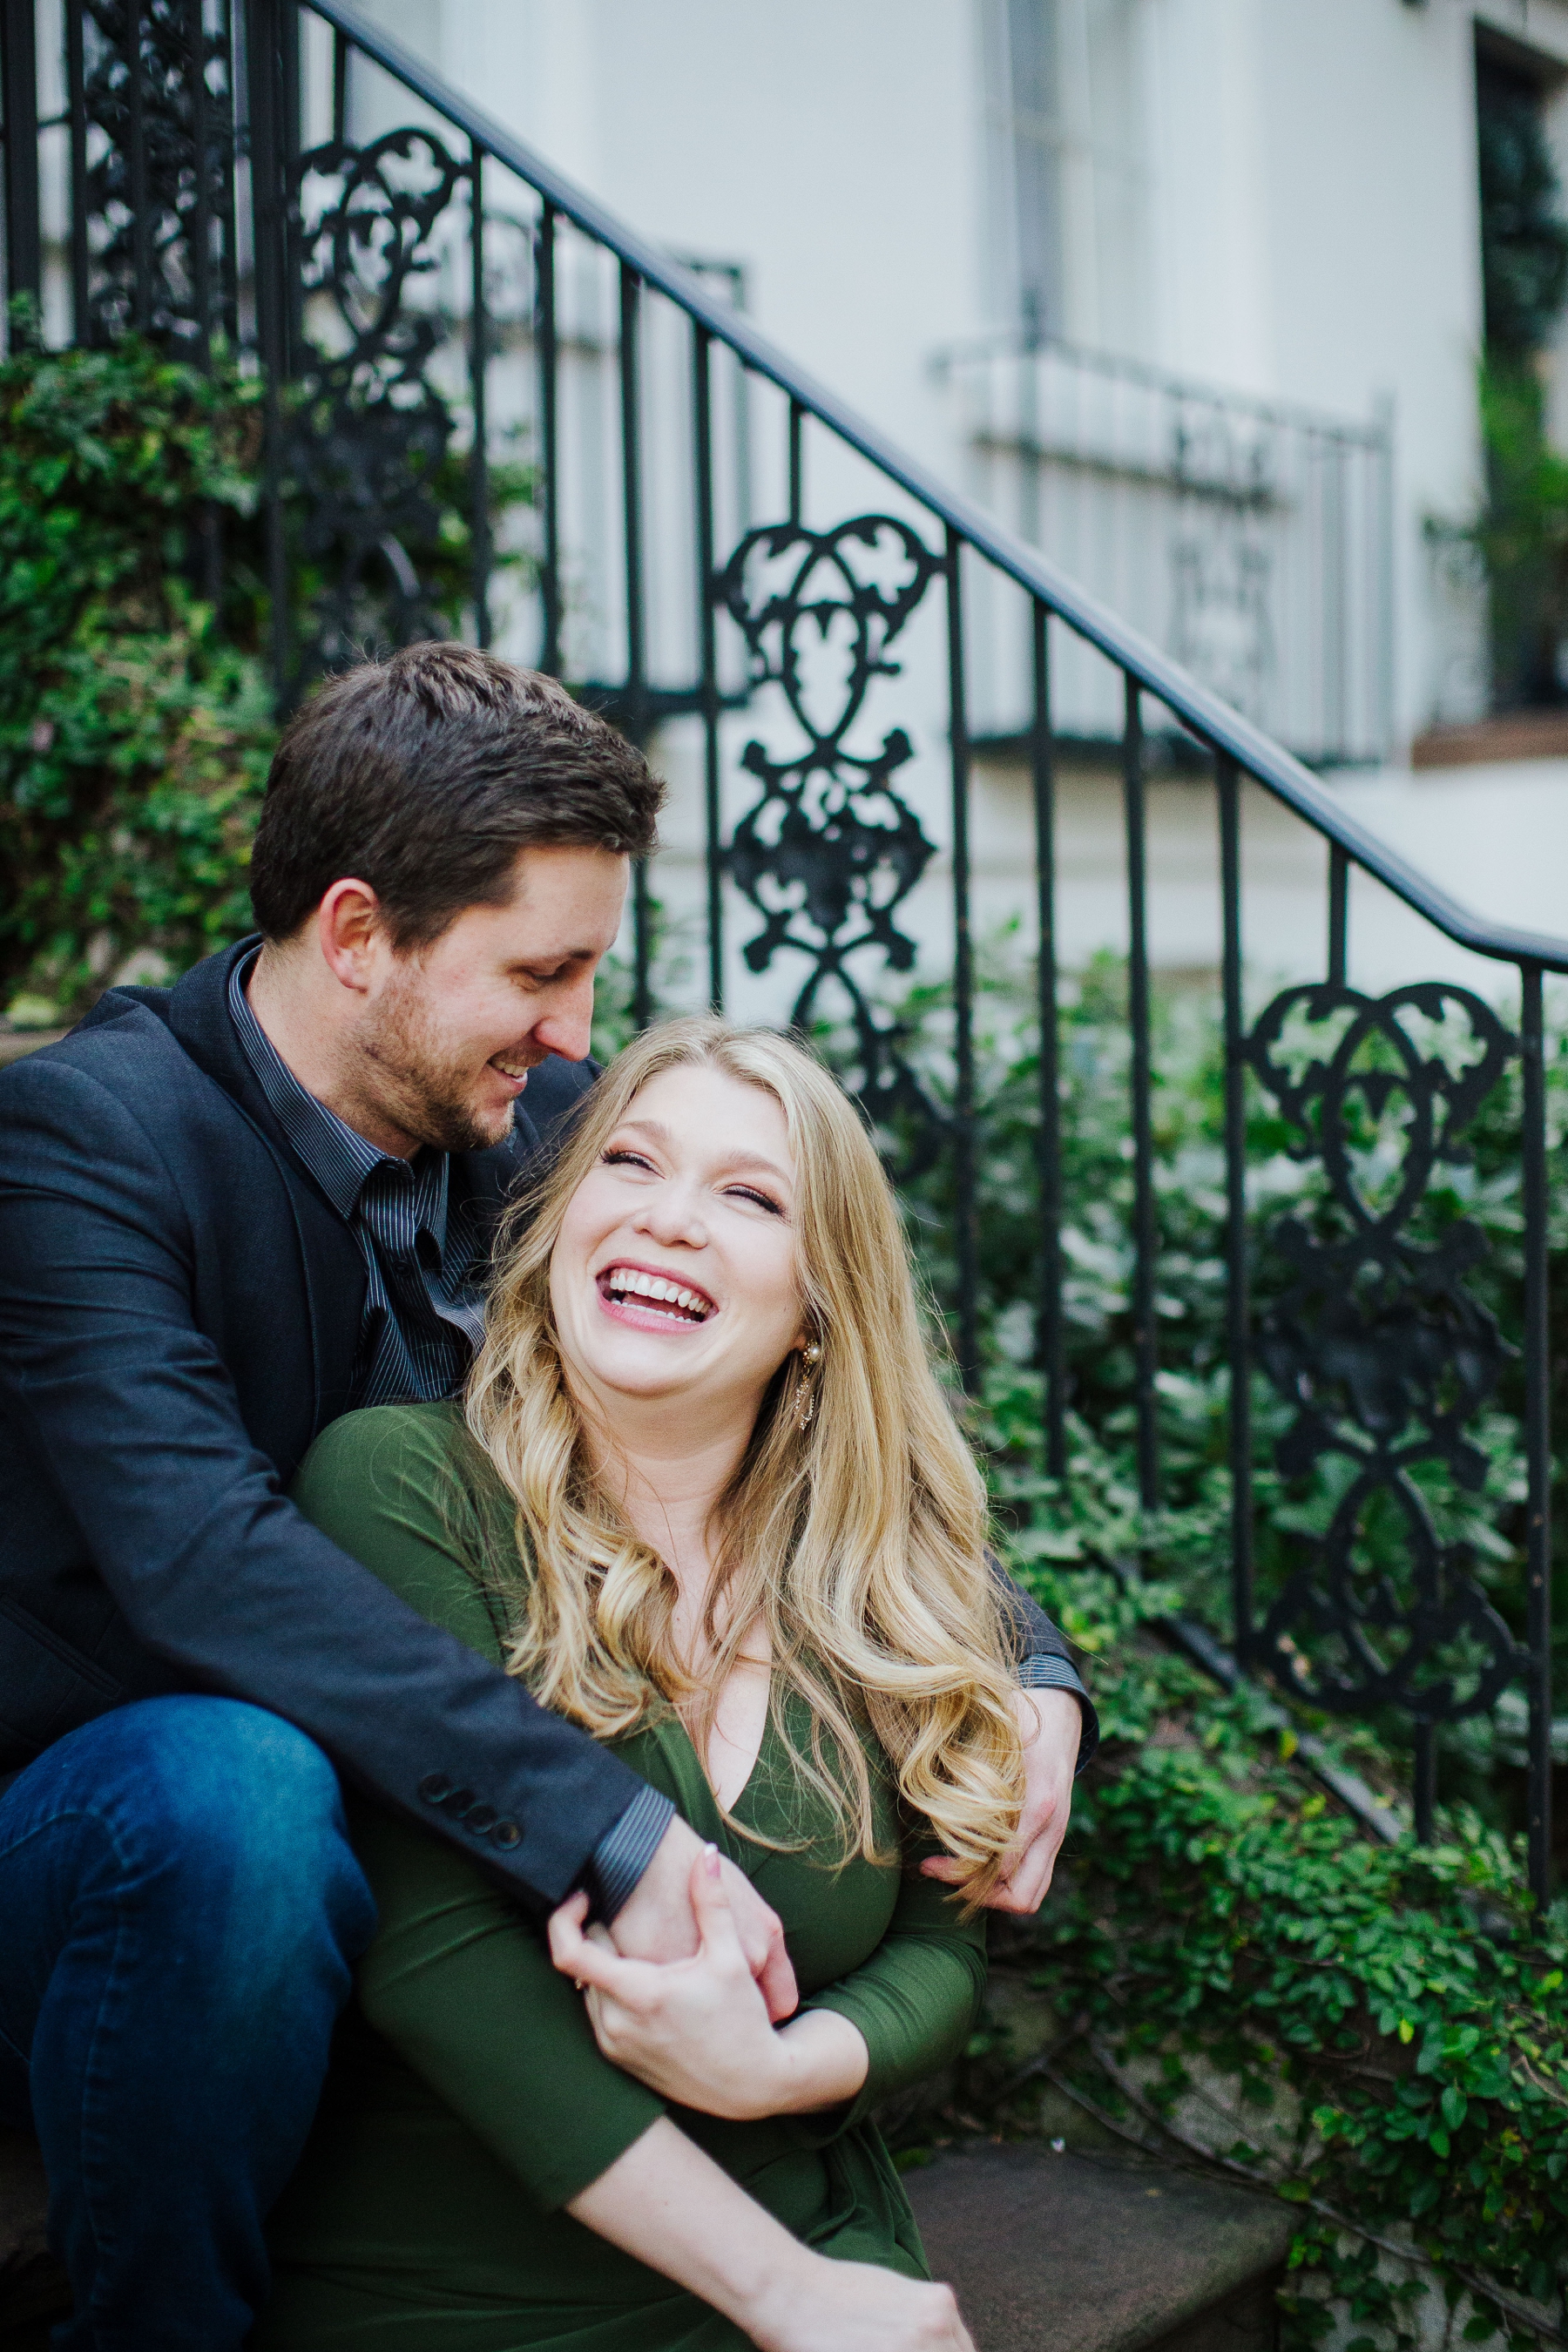 Lifestyle Engagement Shoot in Downtown Savannah, Georgia – Izzy Hudgins Photography